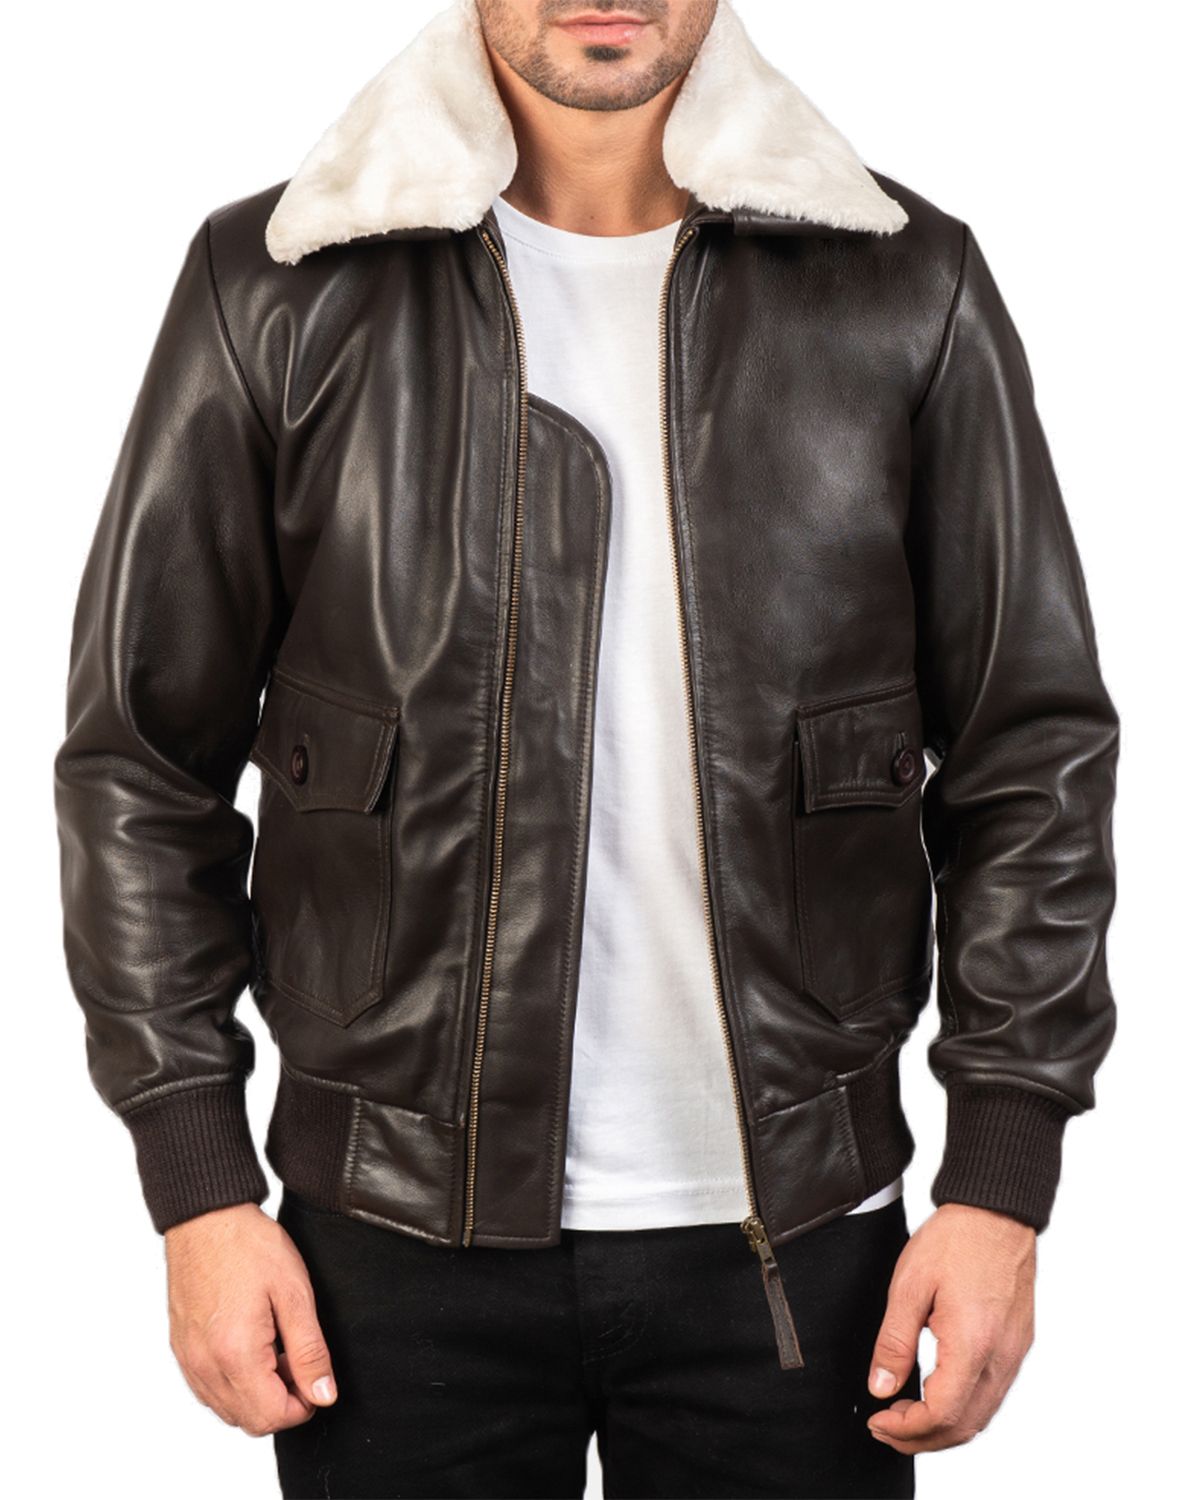 Mens Bomber Real Sheepskin Leather Jacket - Welcome To All Star Jacket